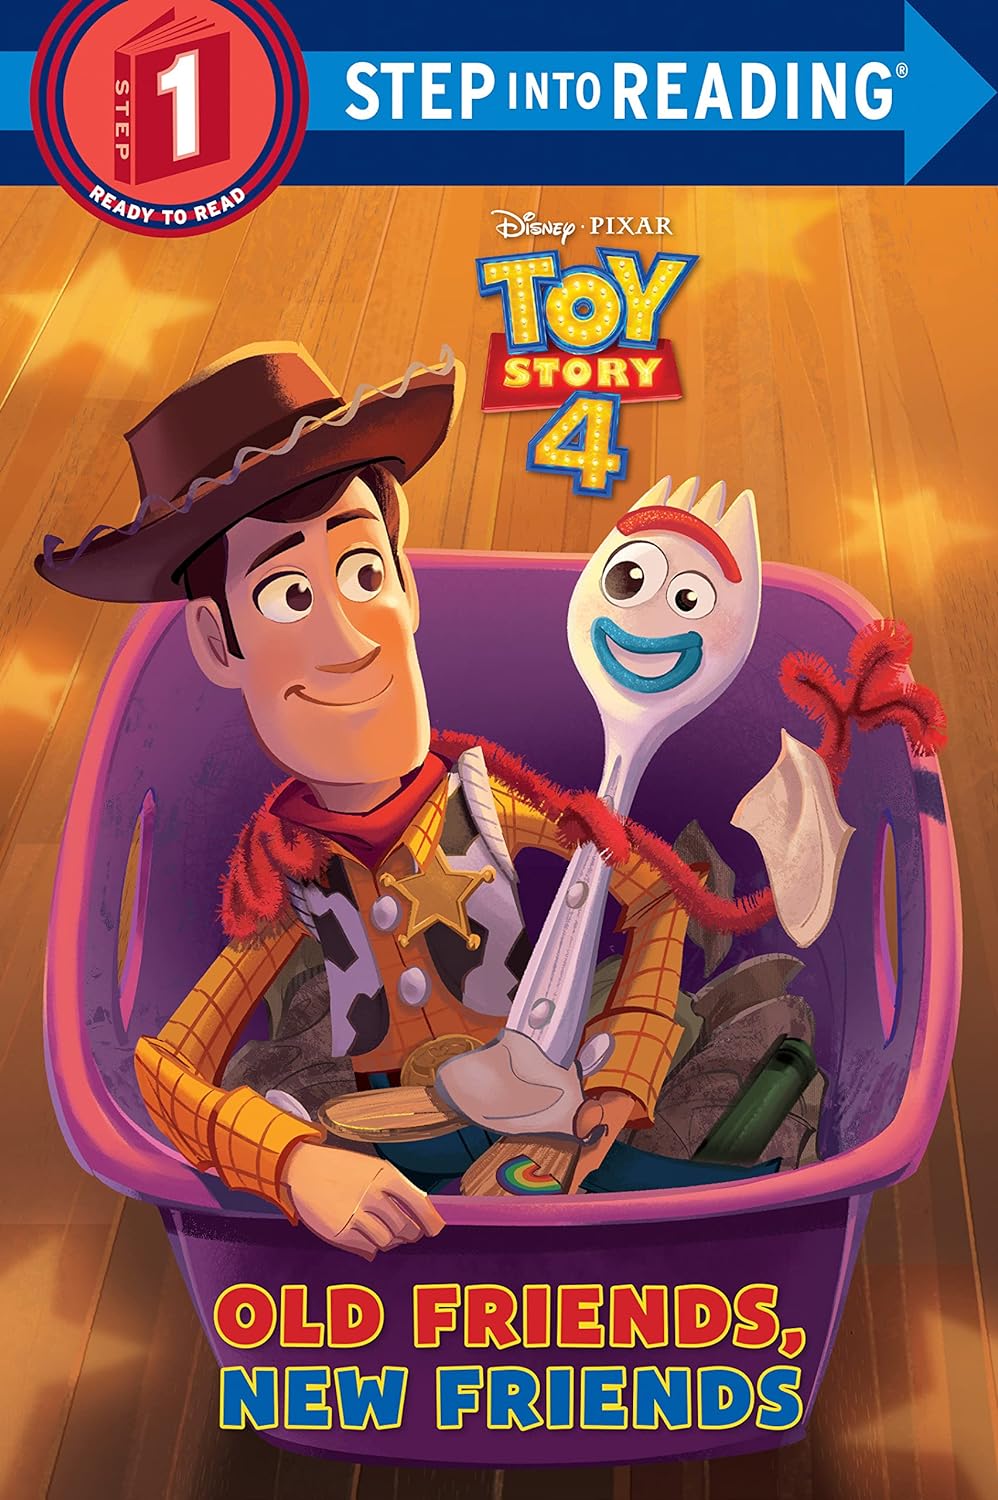 Woody Marionette – Toy Story